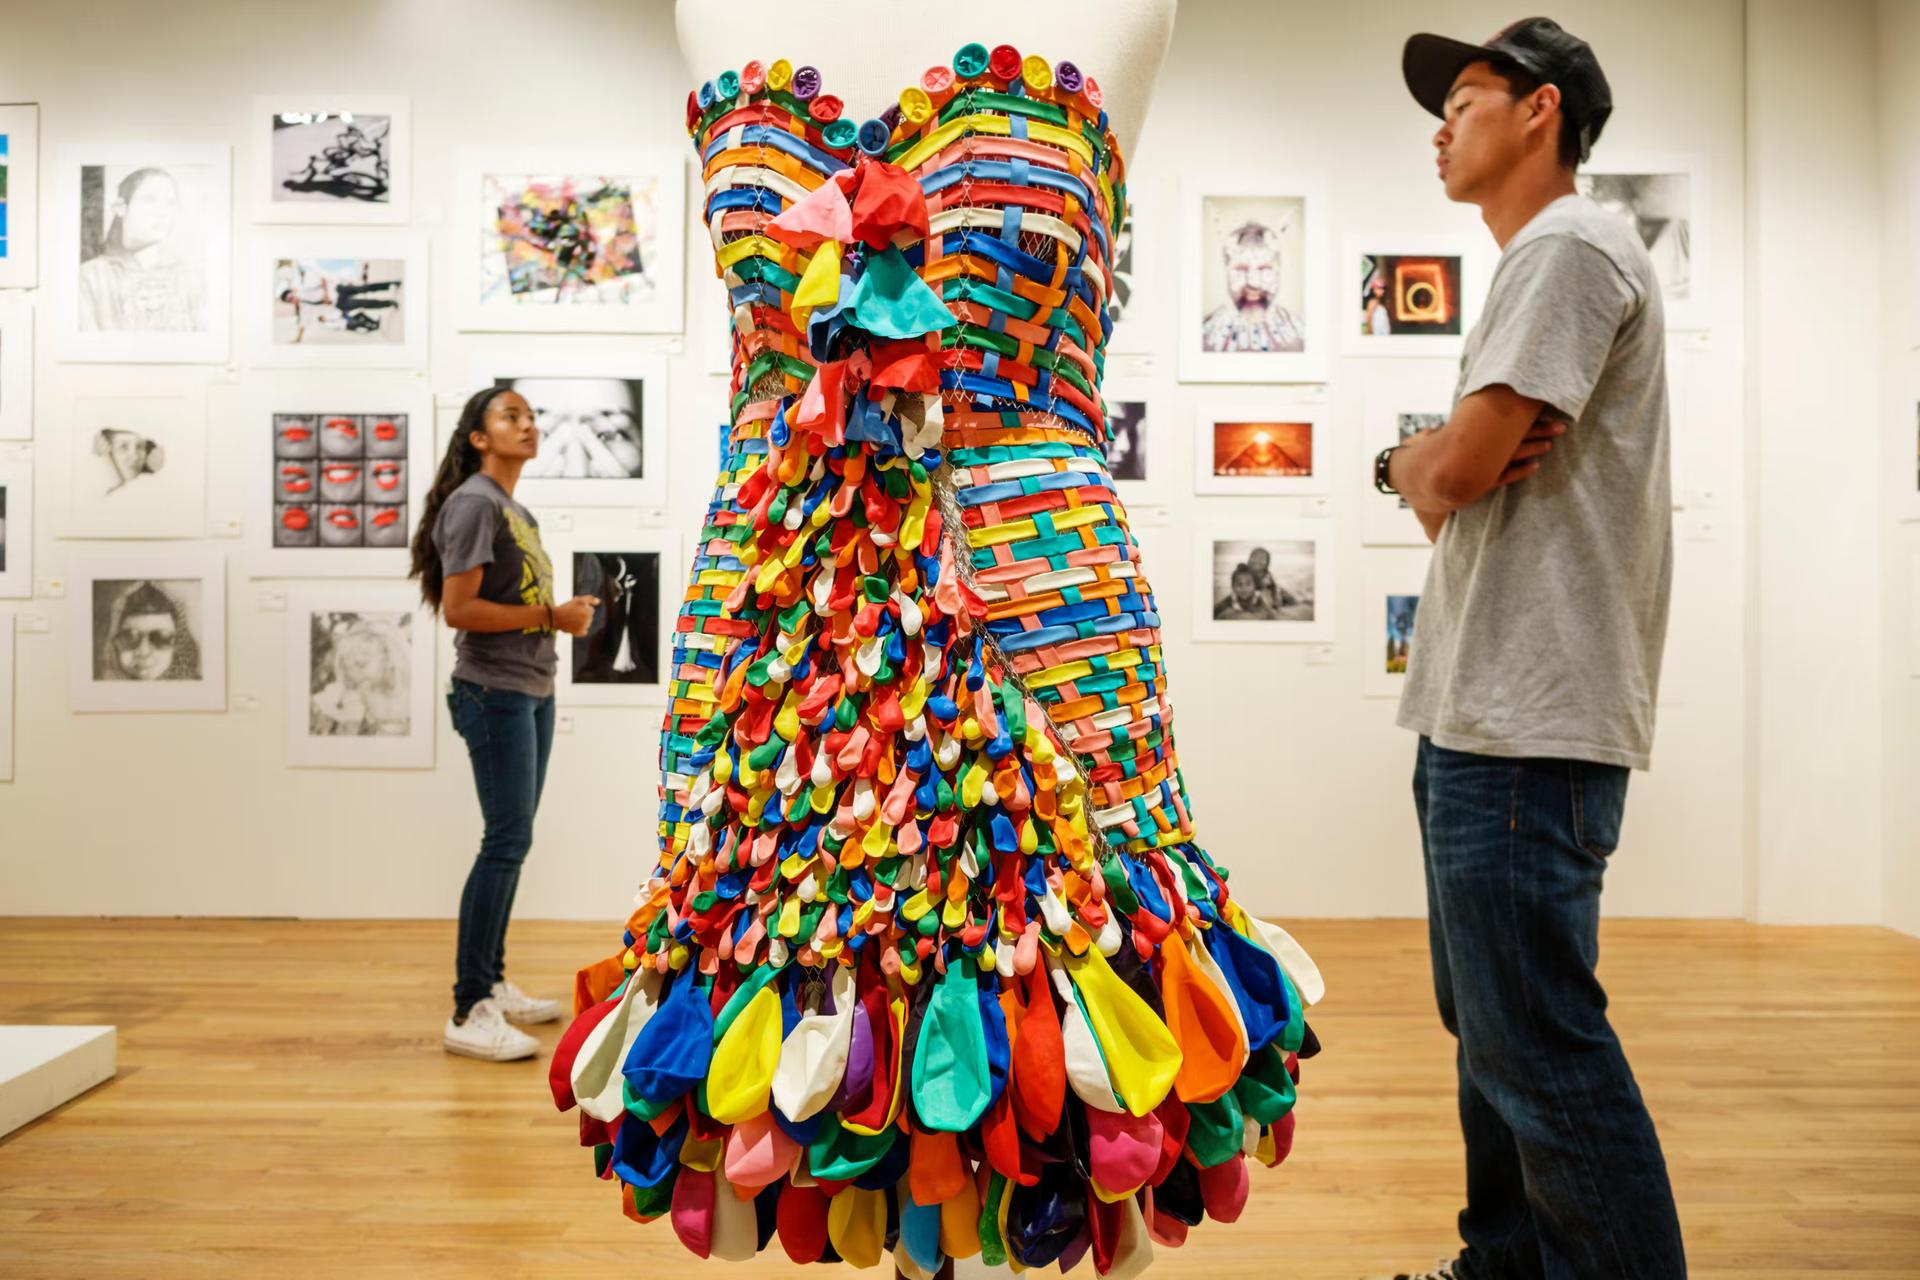 A man in a hat looks at a colorful dress in an art gallery in Hawaii